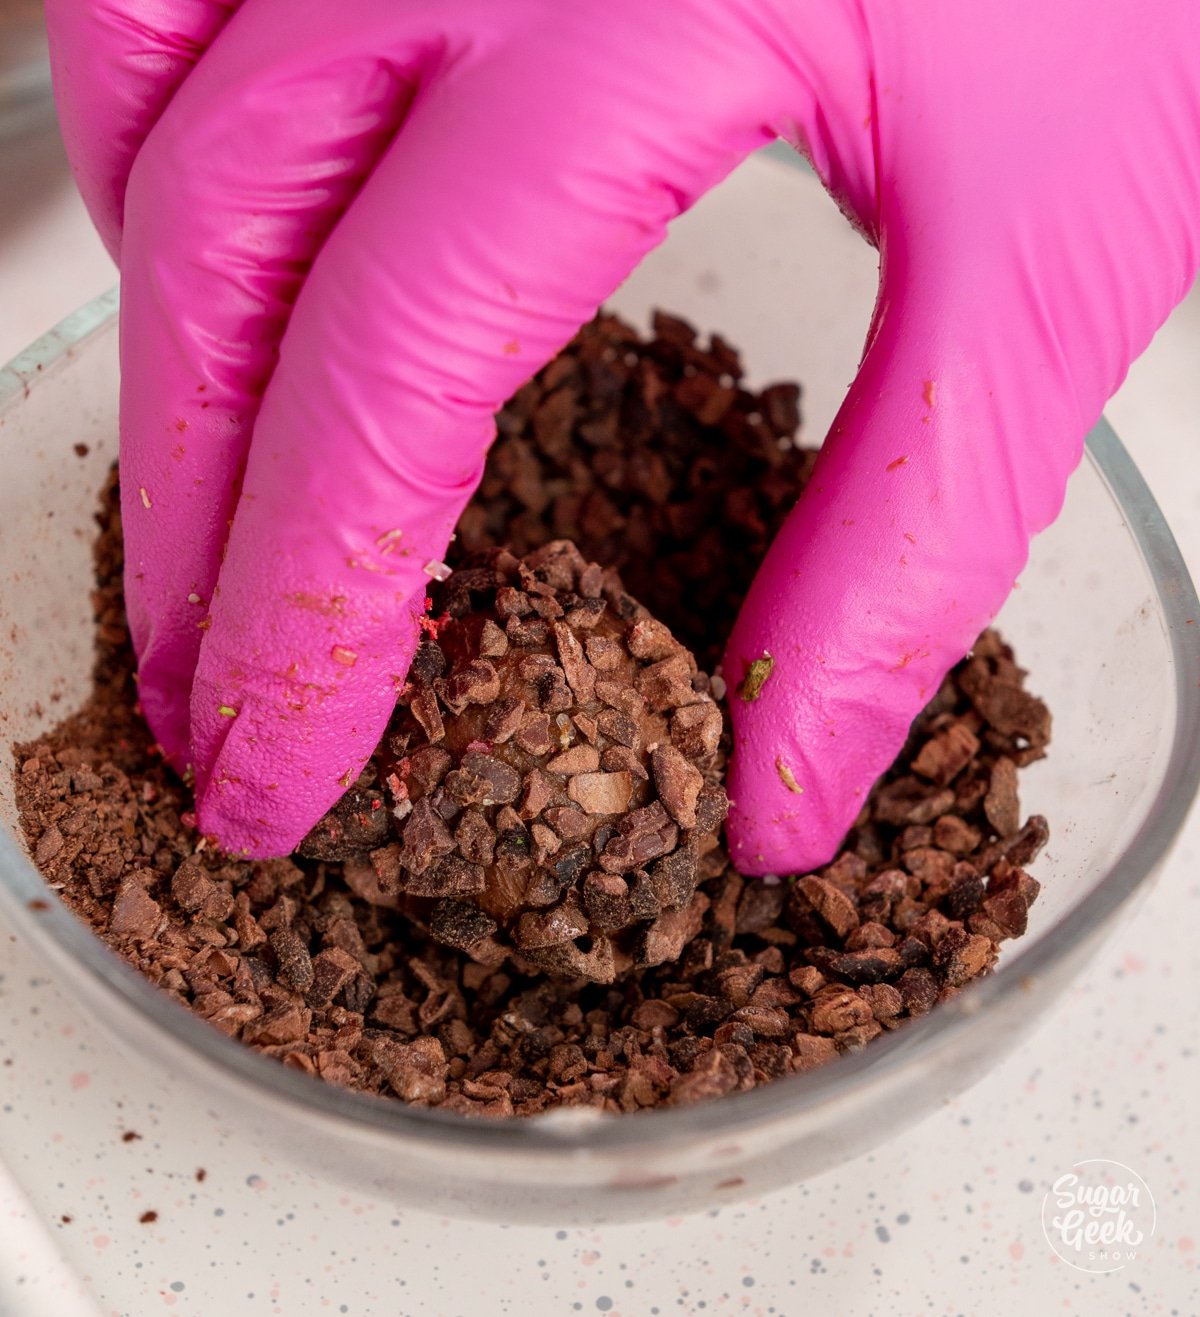 gloved hand rolling a ganache truffle in cocoa nibs